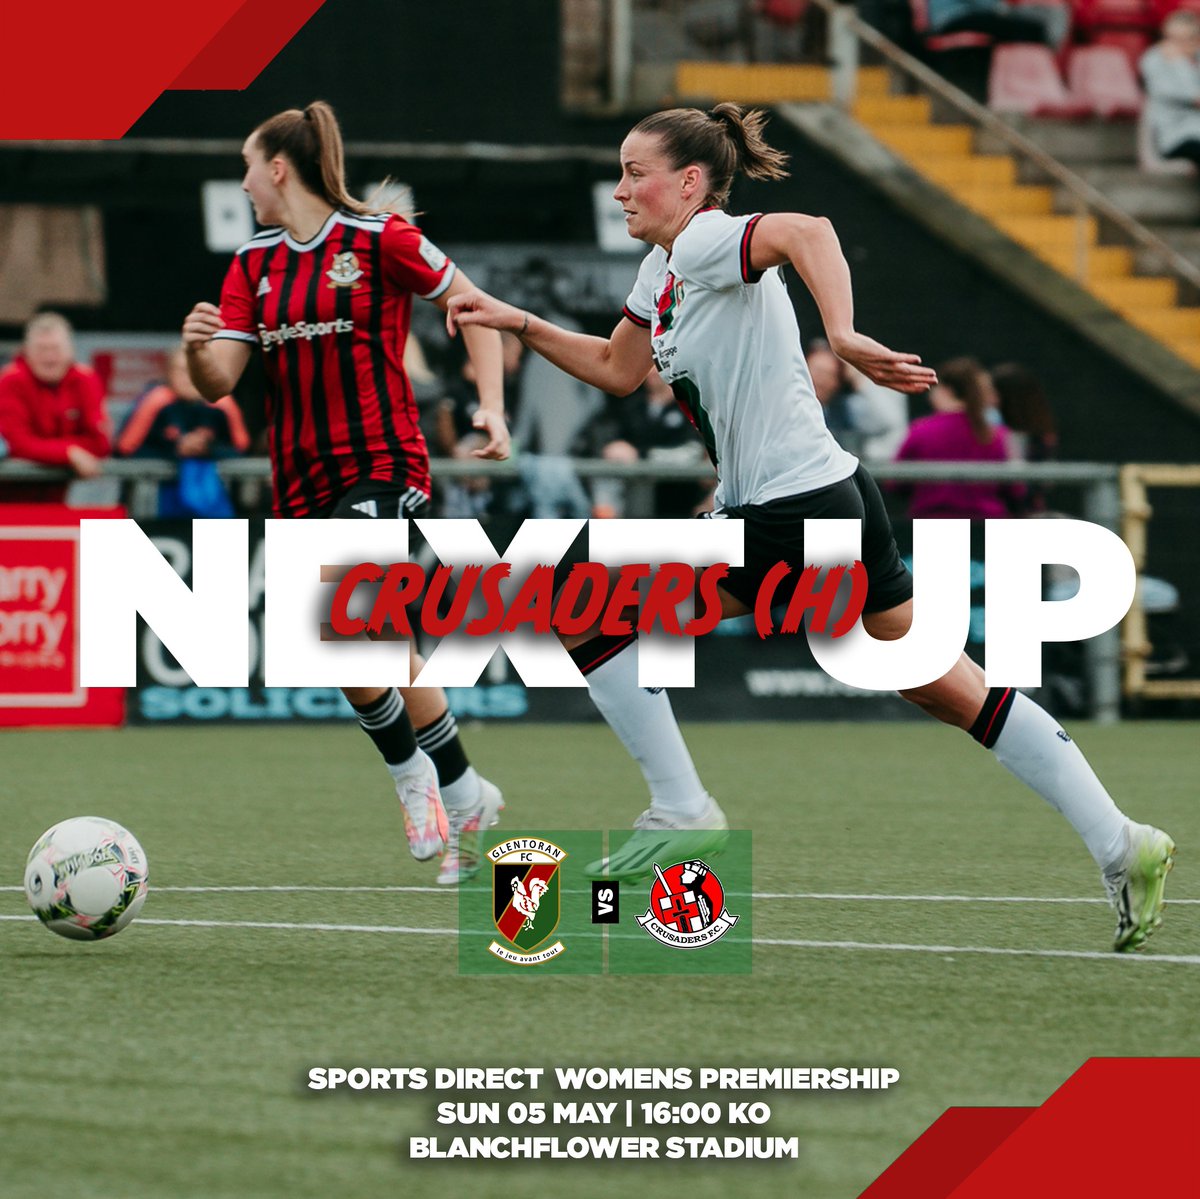 𝗟𝗘𝗔𝗚𝗨𝗘 𝗢𝗣𝗘𝗡𝗘𝗥 🟢 🔴 ⚫ We start our defence of the Sports Direct Women's Premiership on Sunday as Crusaders travel to The Blanchflower. Come down and support your team from 16:00, season tickets are still available to buy at glentoran.com/tickets or pay at the gate!